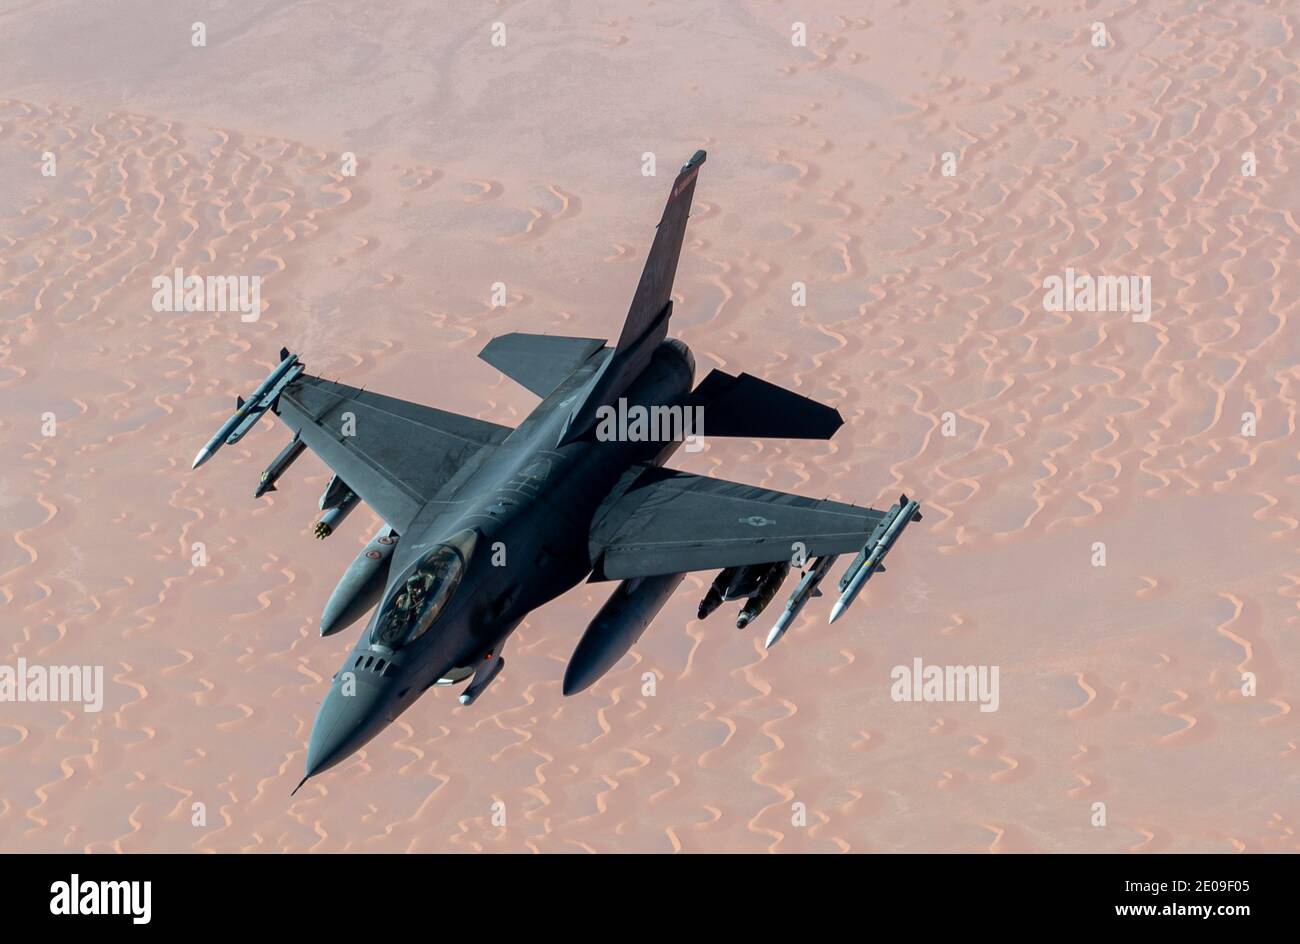 Persian Gulf, United States. 30th Dec, 2020. A U.S. Air Force A U.S. Air Force F-16 Fighting Falcon fighter jet approaches a KC-135 Stratotanker for refueling December 30, 2020 over the Persian Gulf. The fighter is an escort for B-52 Stratofortress strategic bombers during a show of force mission as a message to Iran. Credit: Planetpix/Alamy Live News Stock Photo